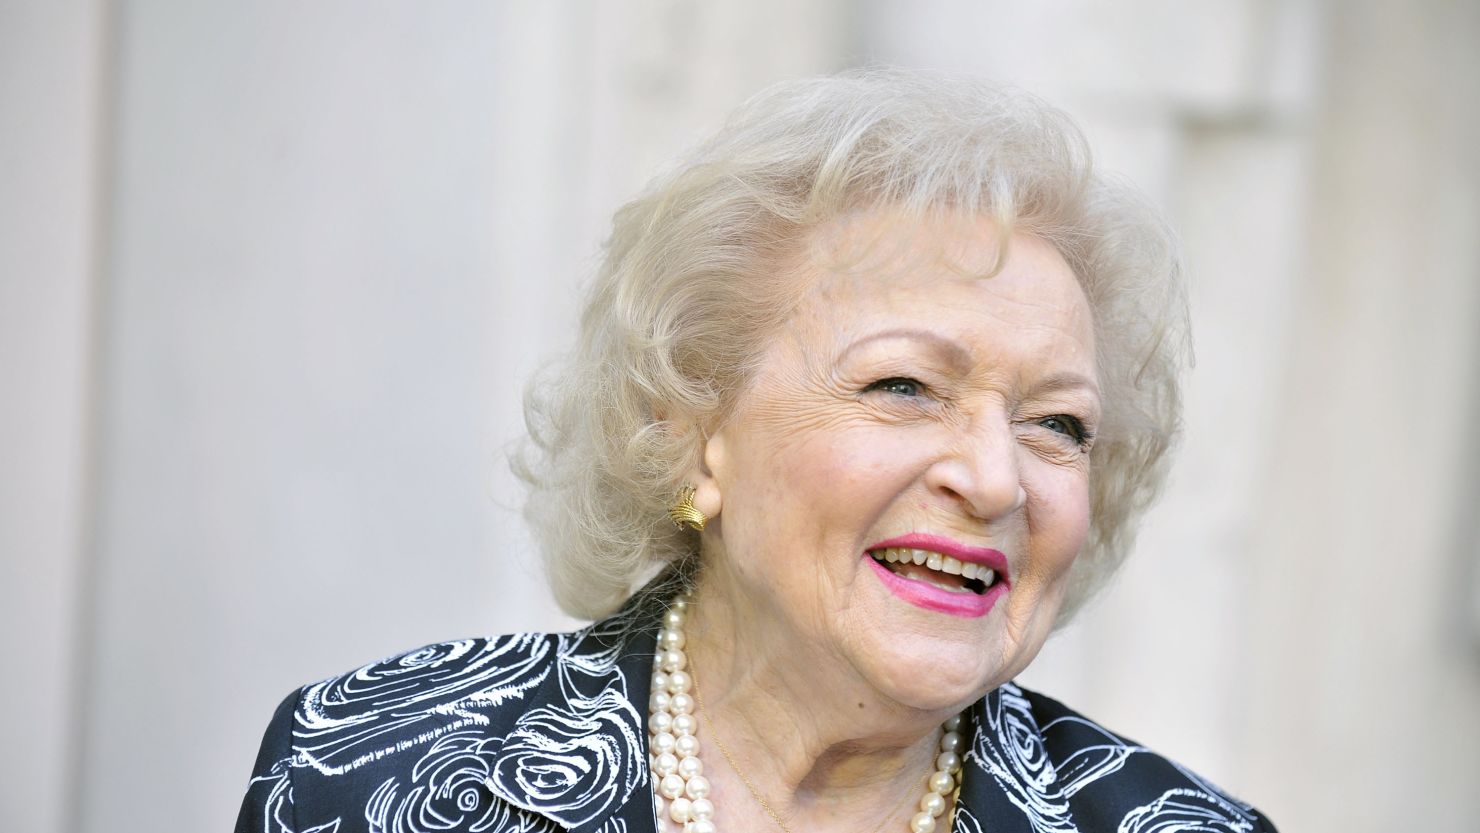 Betty White continues to work on television and in movies and is popular as "America's grandmother."